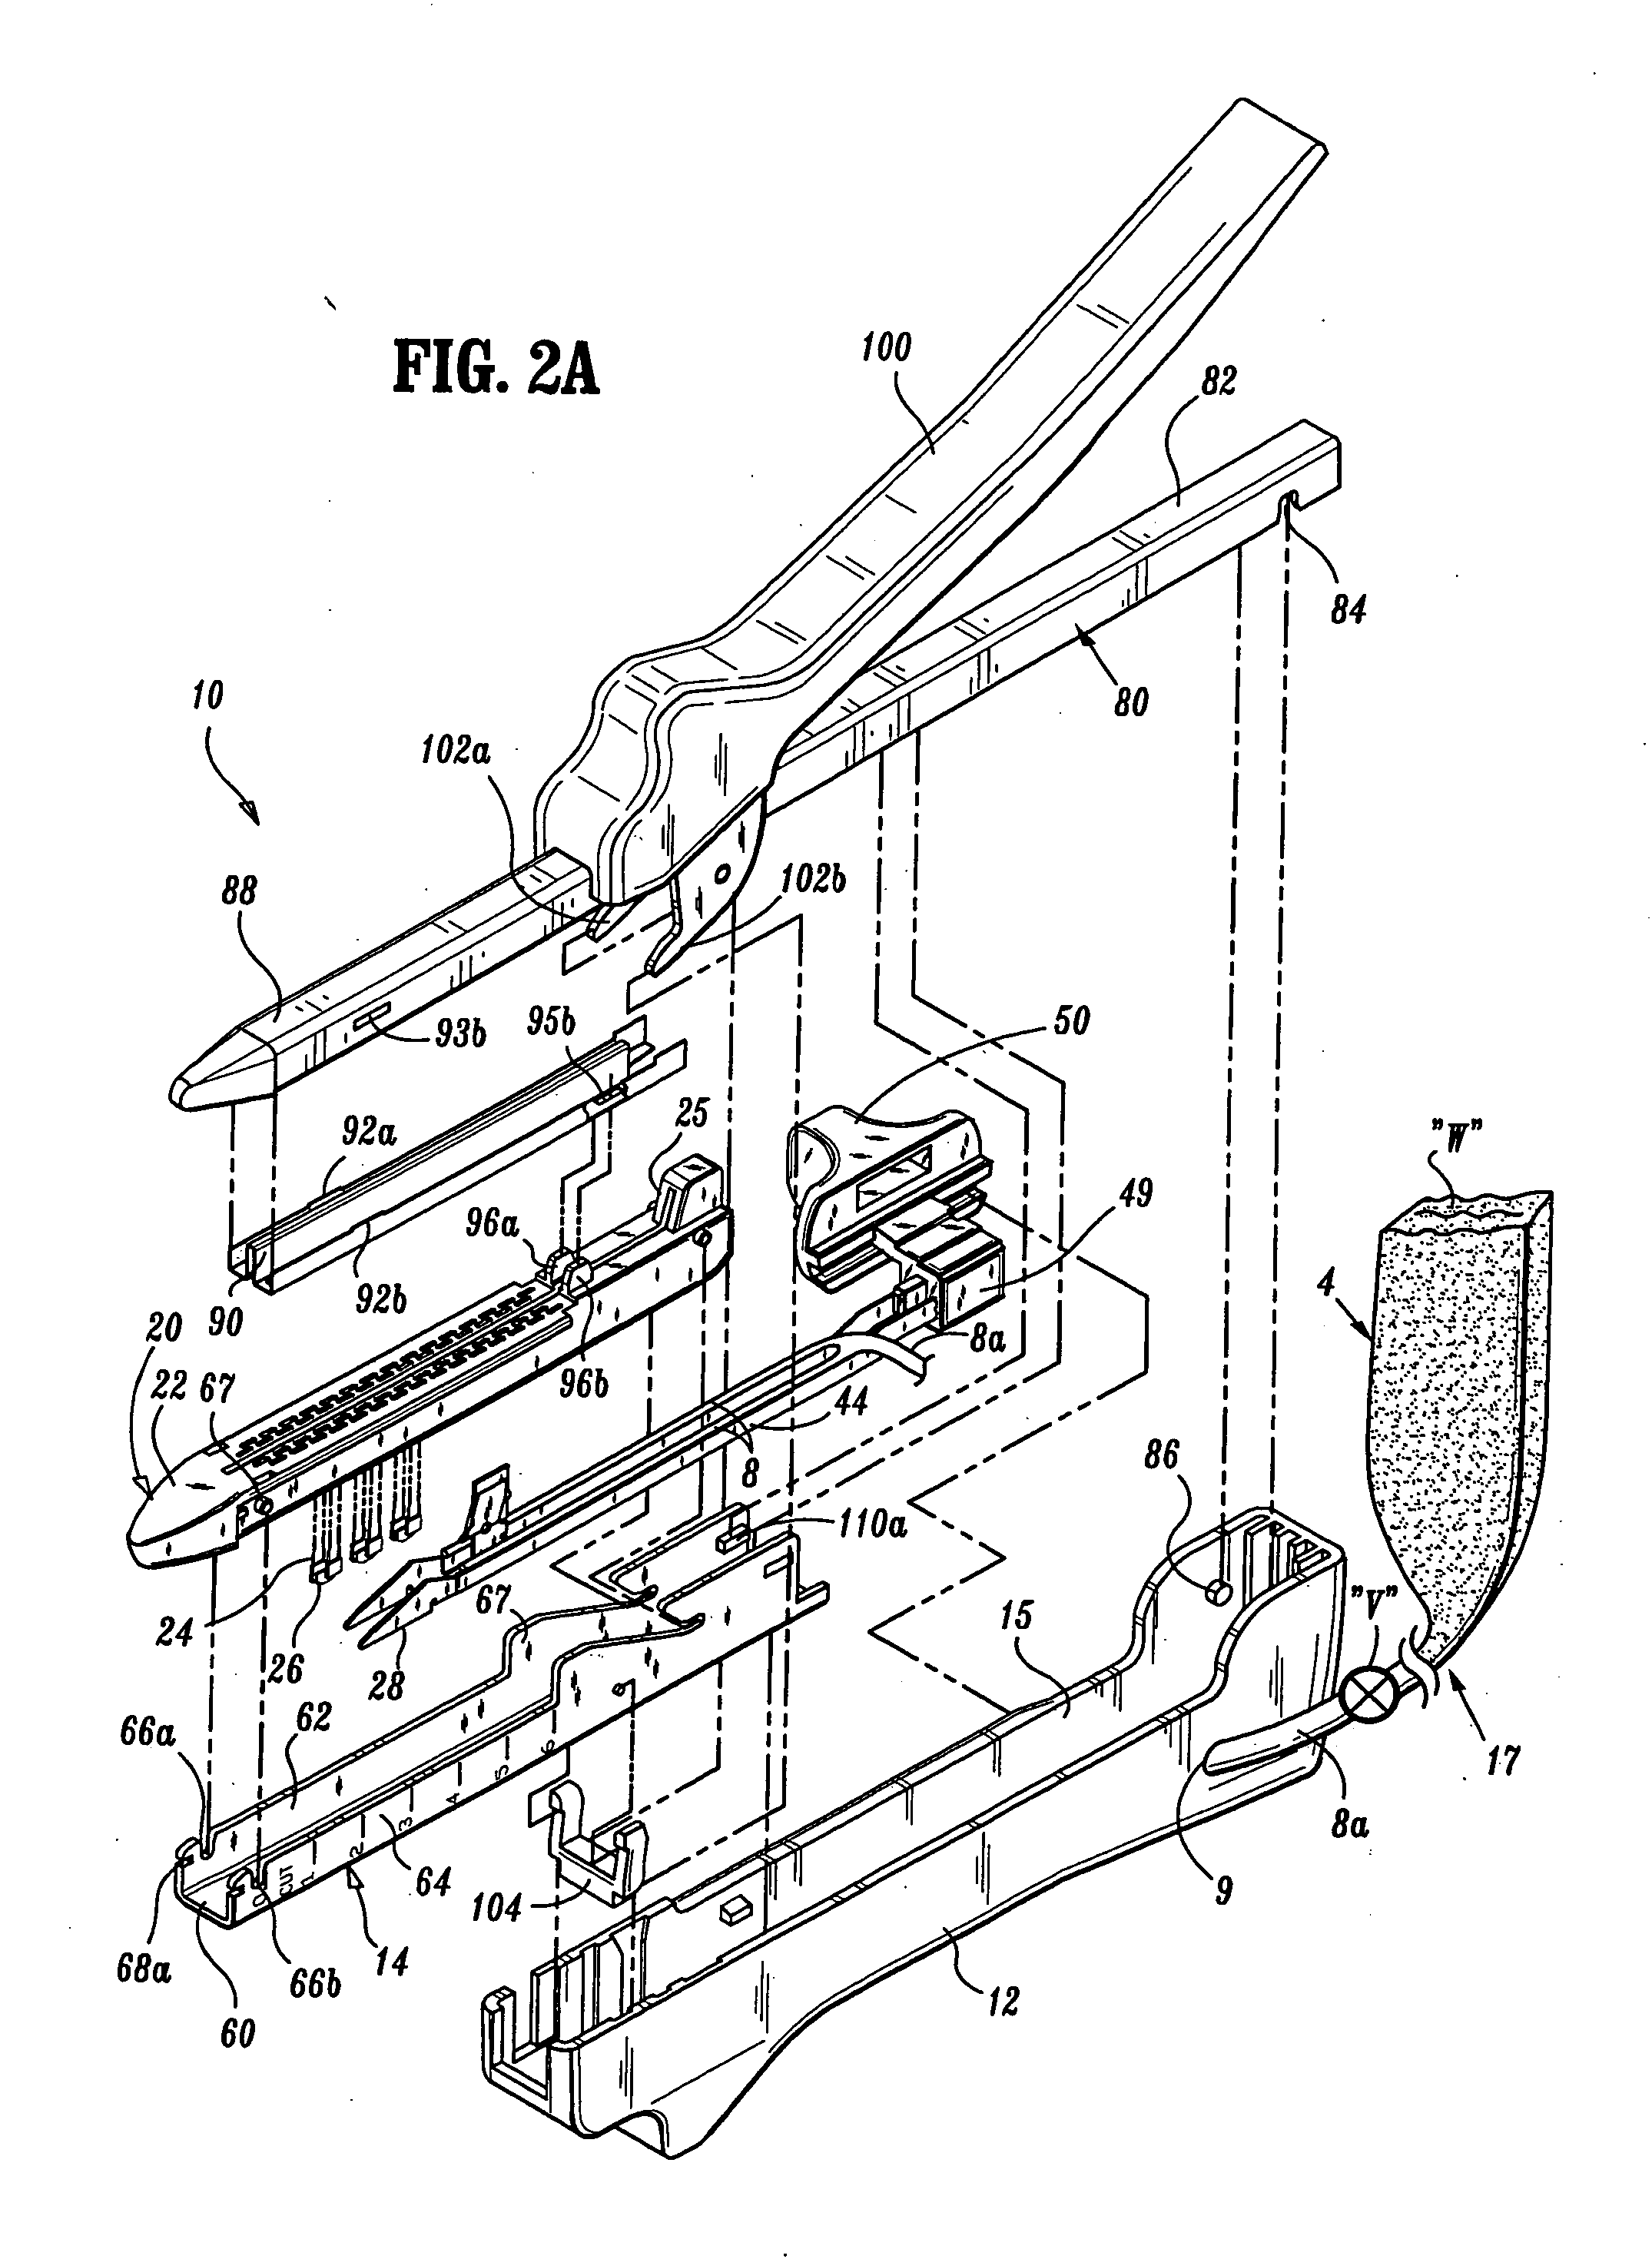 Surgical stapling apparatus having a wound closure material applicator assembly